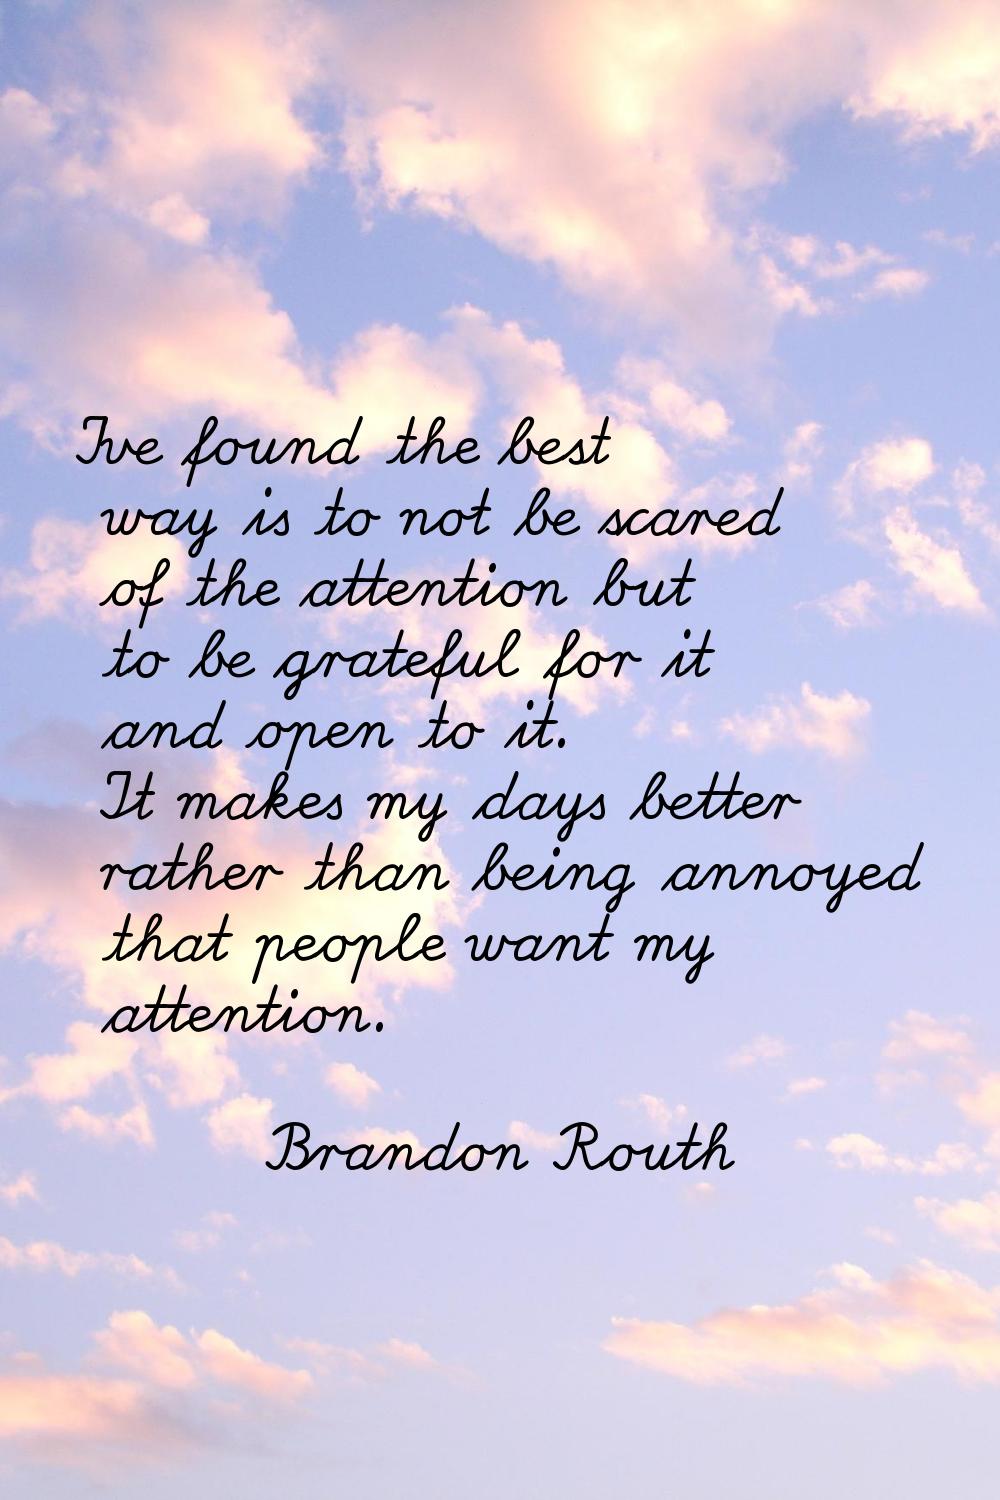 I've found the best way is to not be scared of the attention but to be grateful for it and open to 